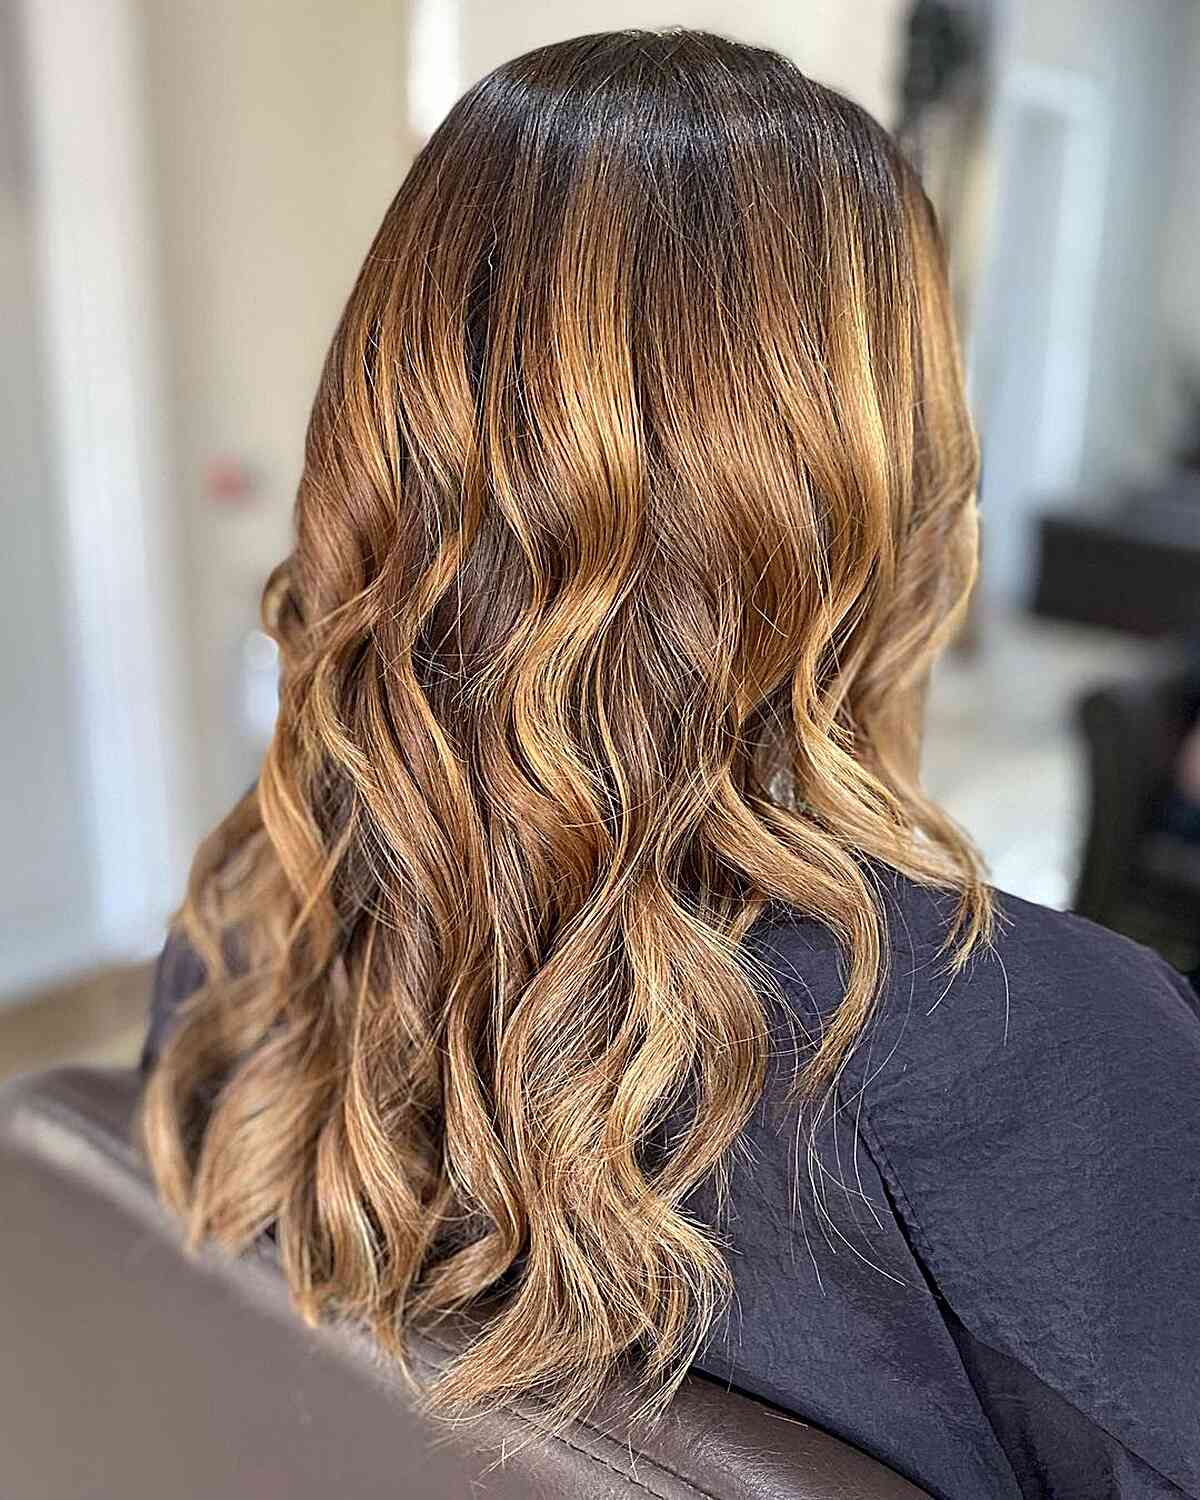 Dark-Rooted Caramel Bronde Ombre Hair Highlights on Medium Cut with Loose Curls